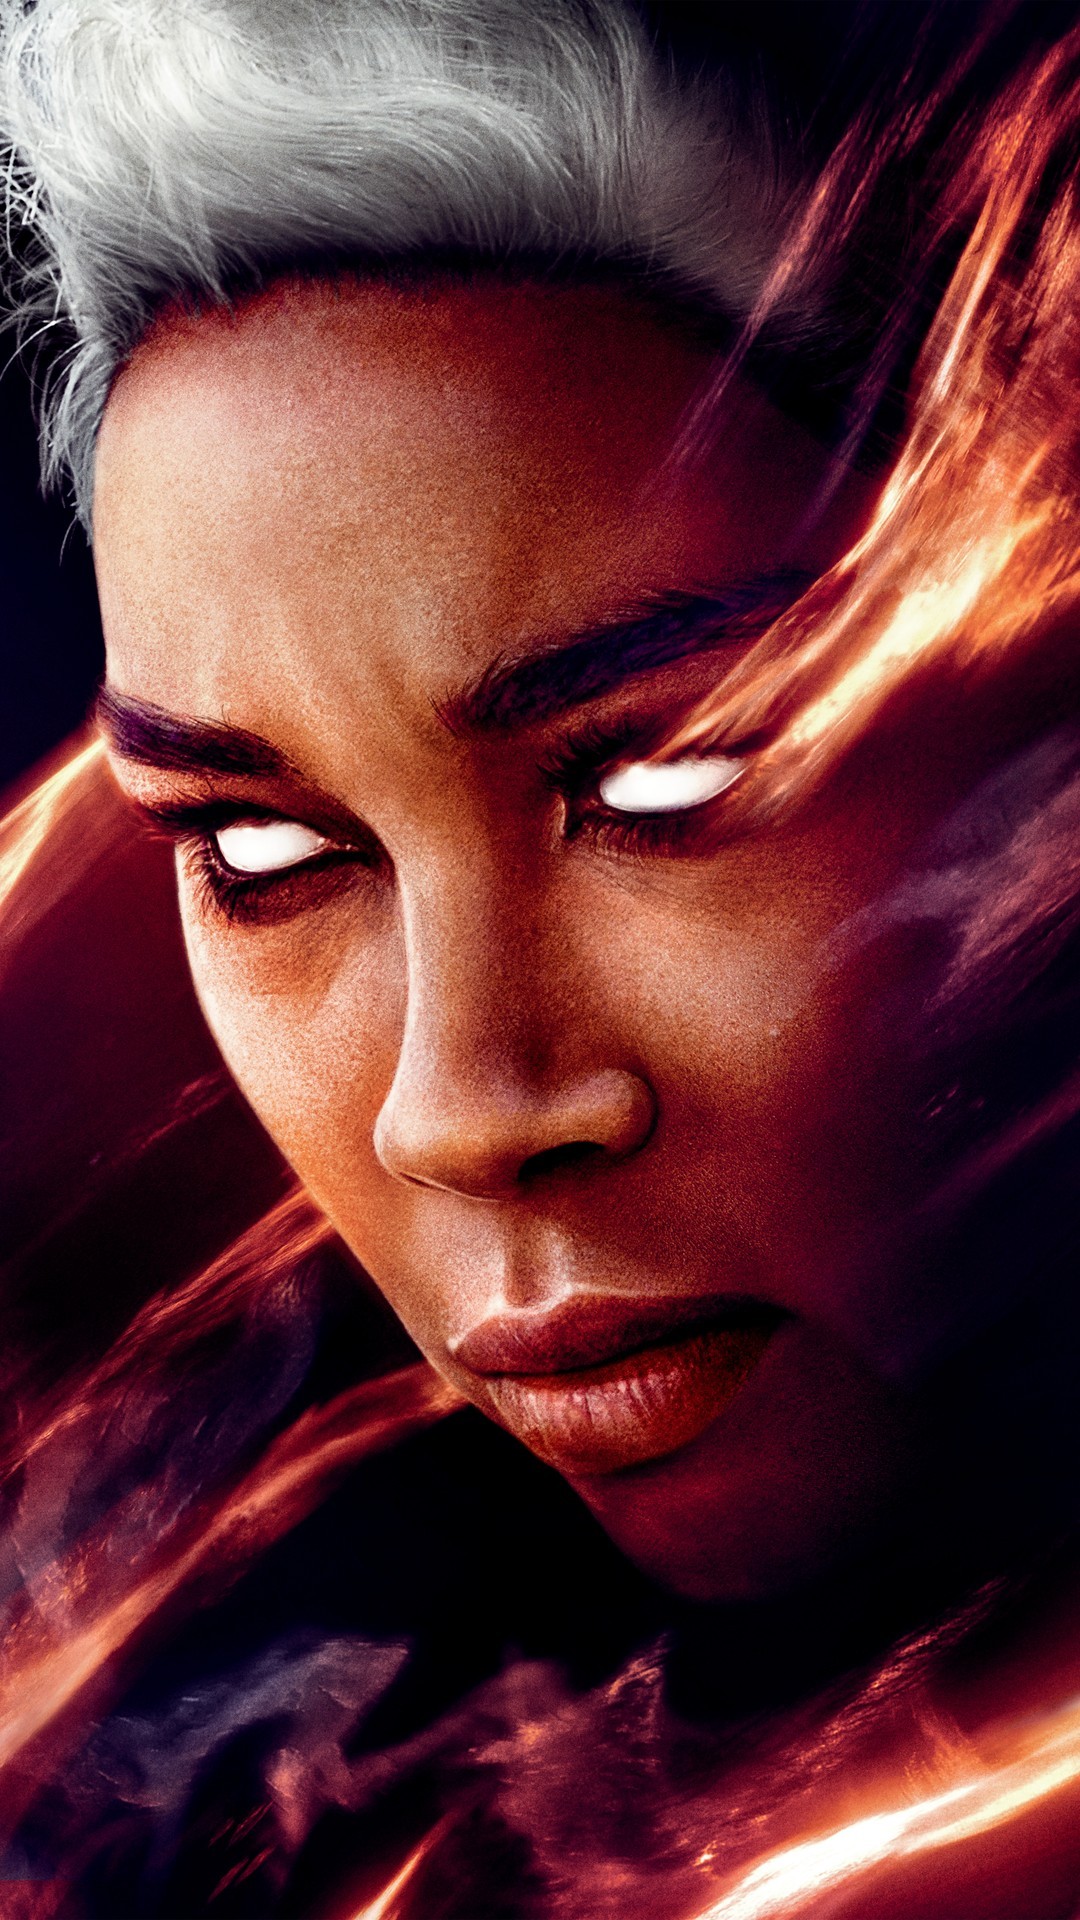 Wallpapers Phone Dark Phoenix 2019 With high-resolution 1080X1920 pixel. You can use this wallpaper for your Android backgrounds, Tablet, Samsung Screensavers, Mobile Phone Lock Screen and another Smartphones device